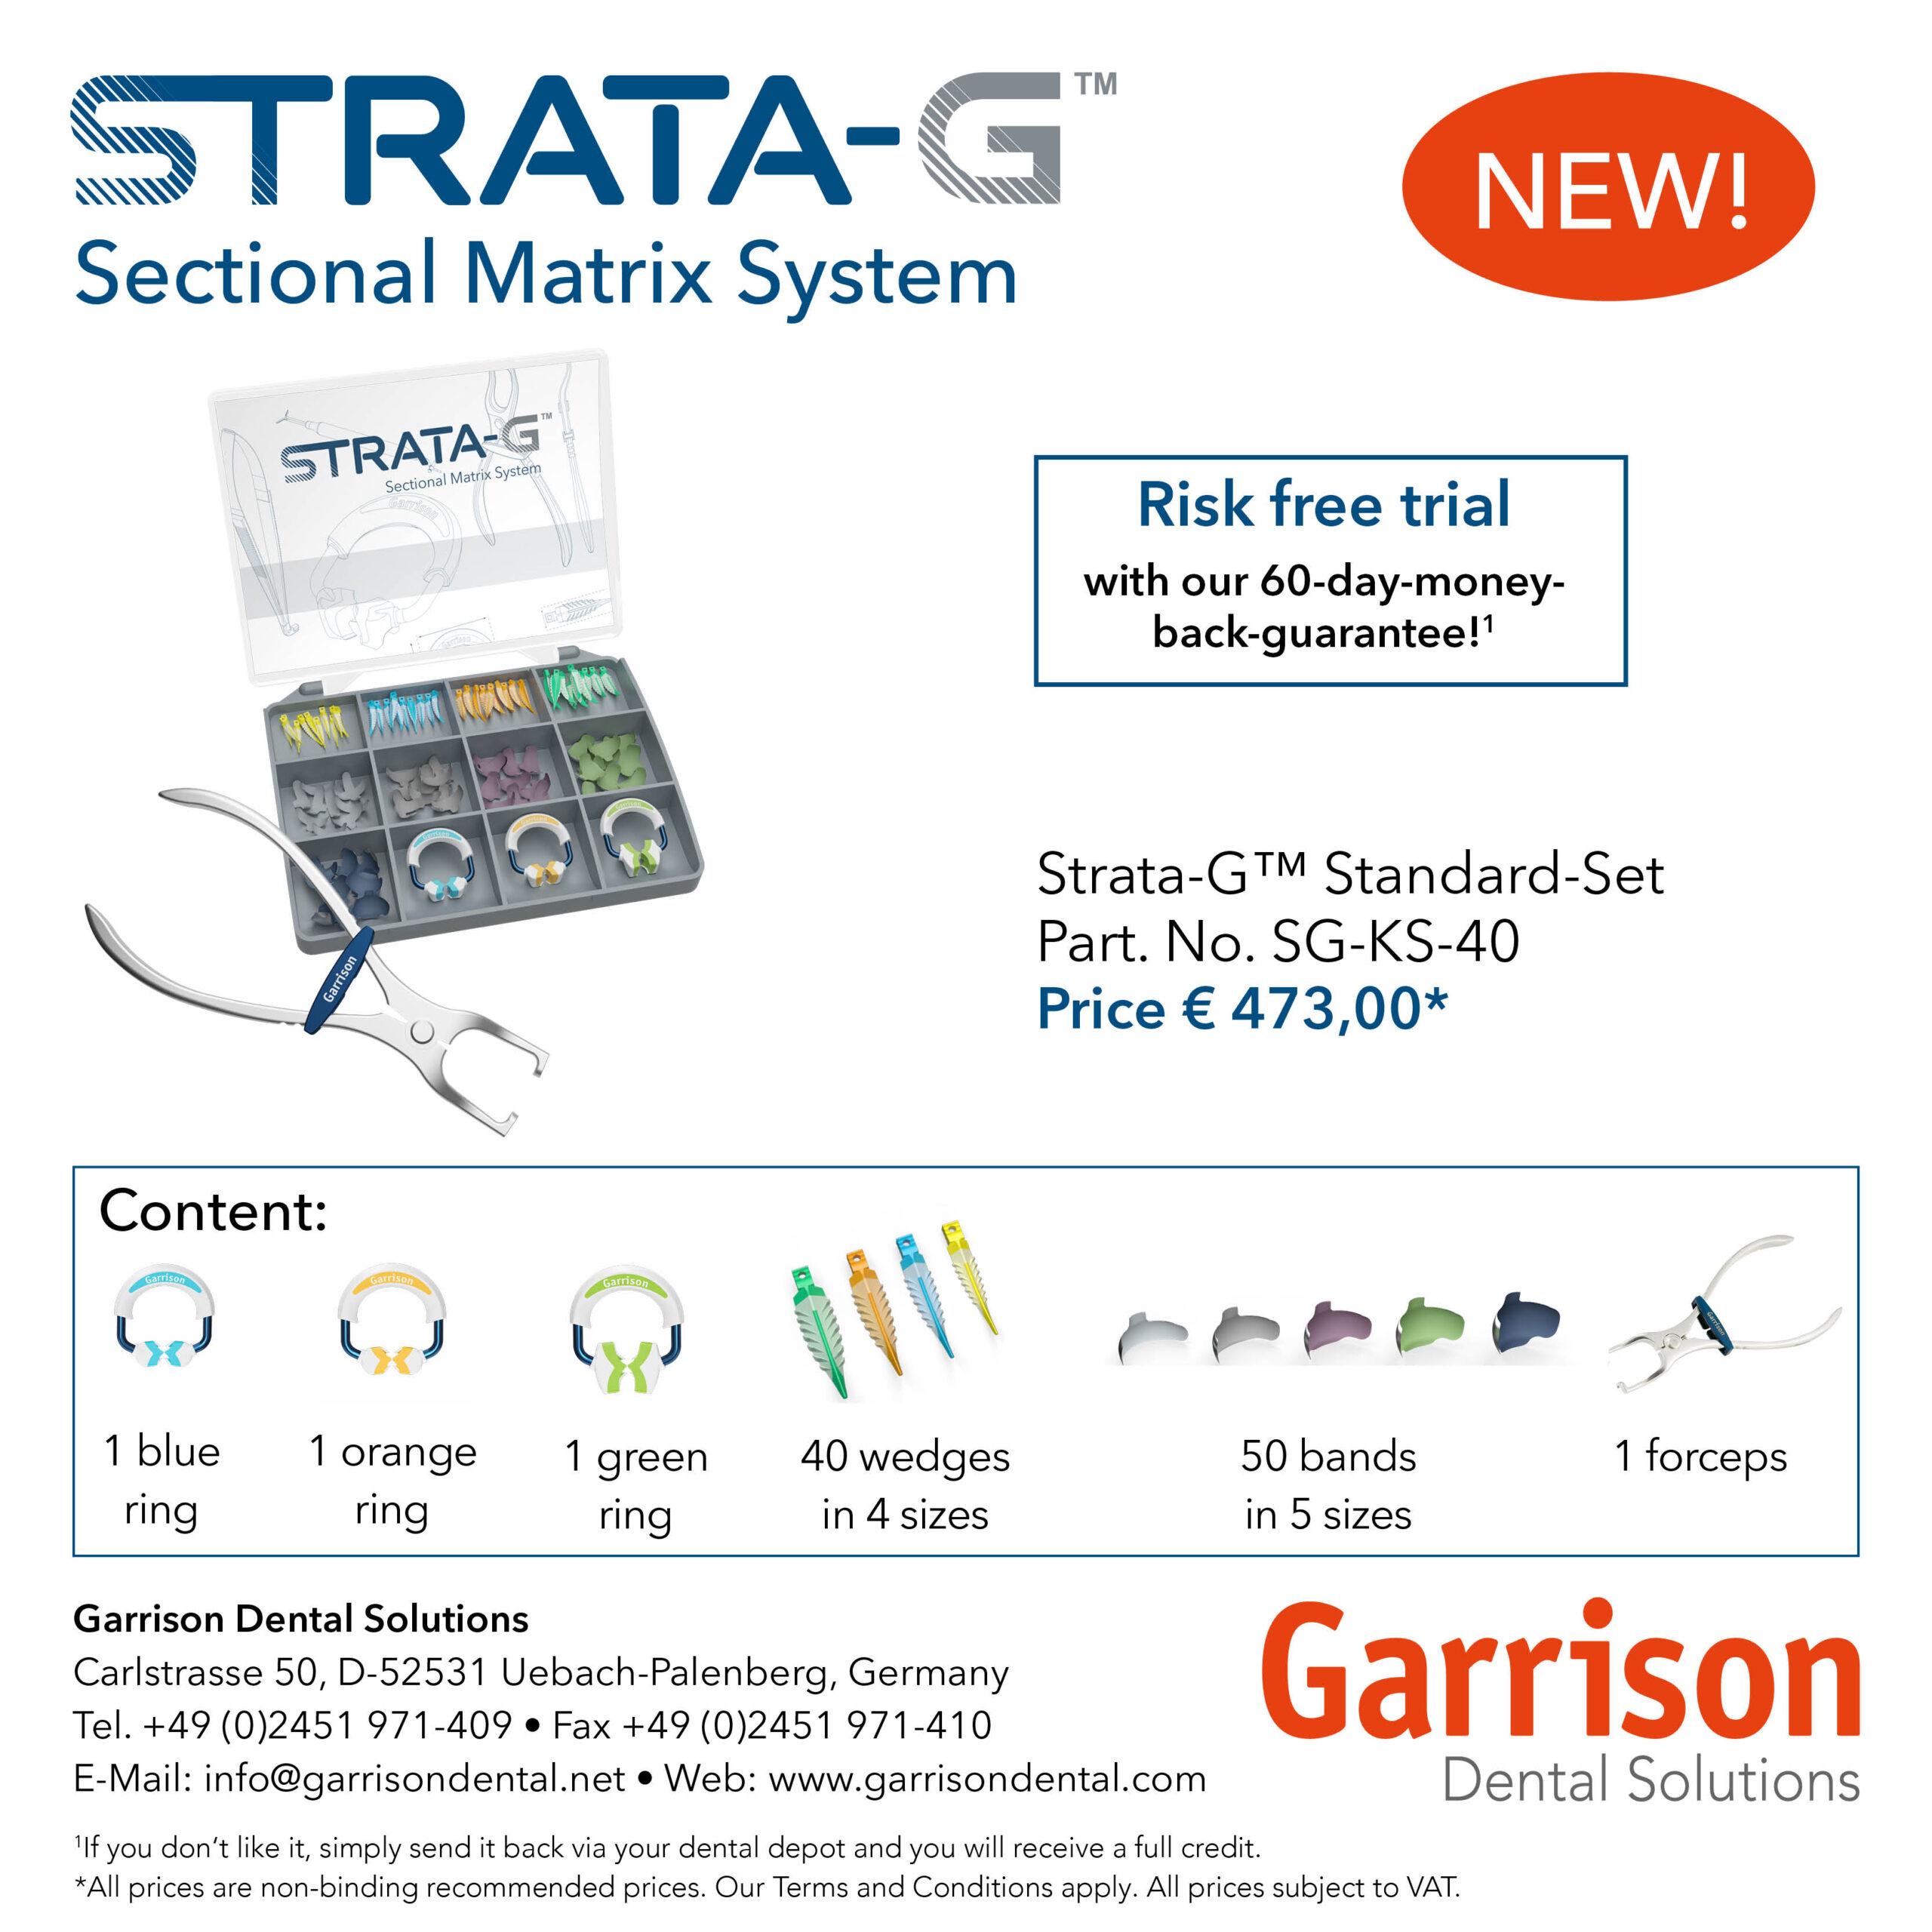 Ad: Find out more about the Strata-G Sectional Matrix System from Garrison Dental Solutions